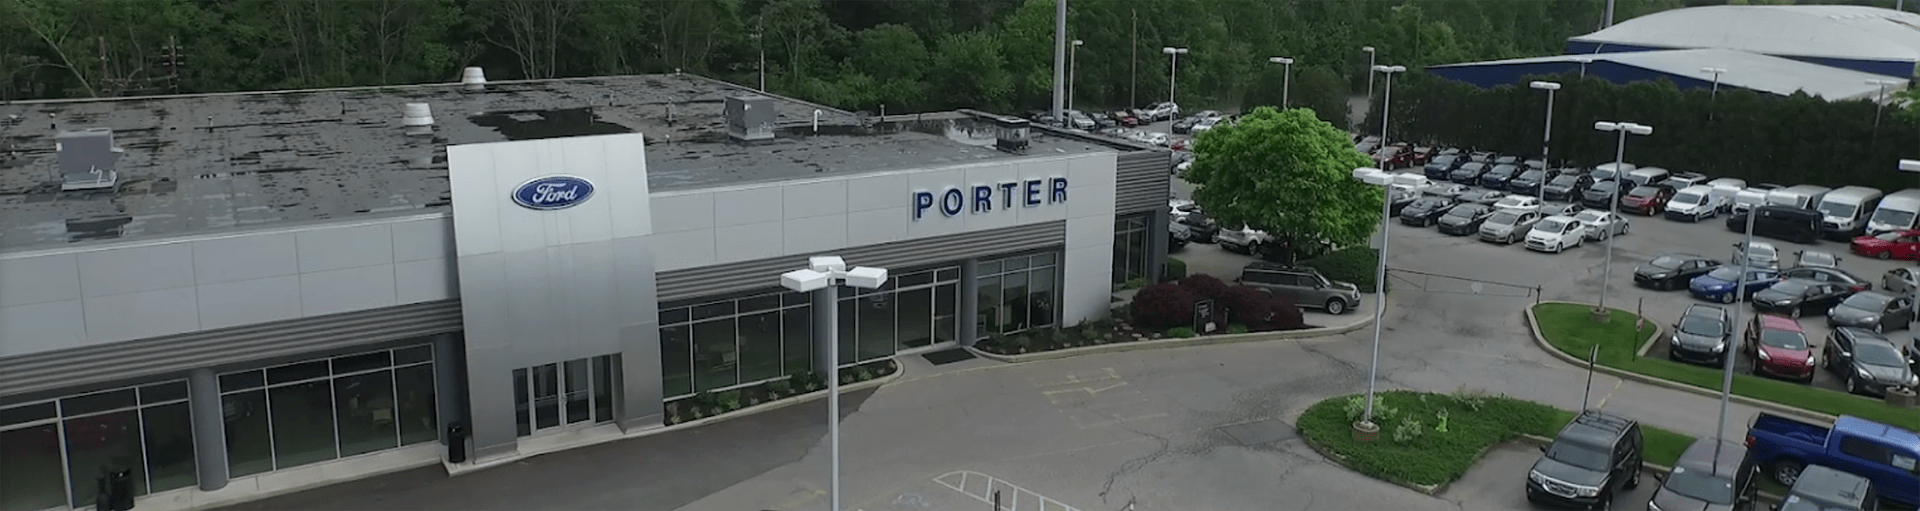 Porter Ford Brake Pad Replacement Service